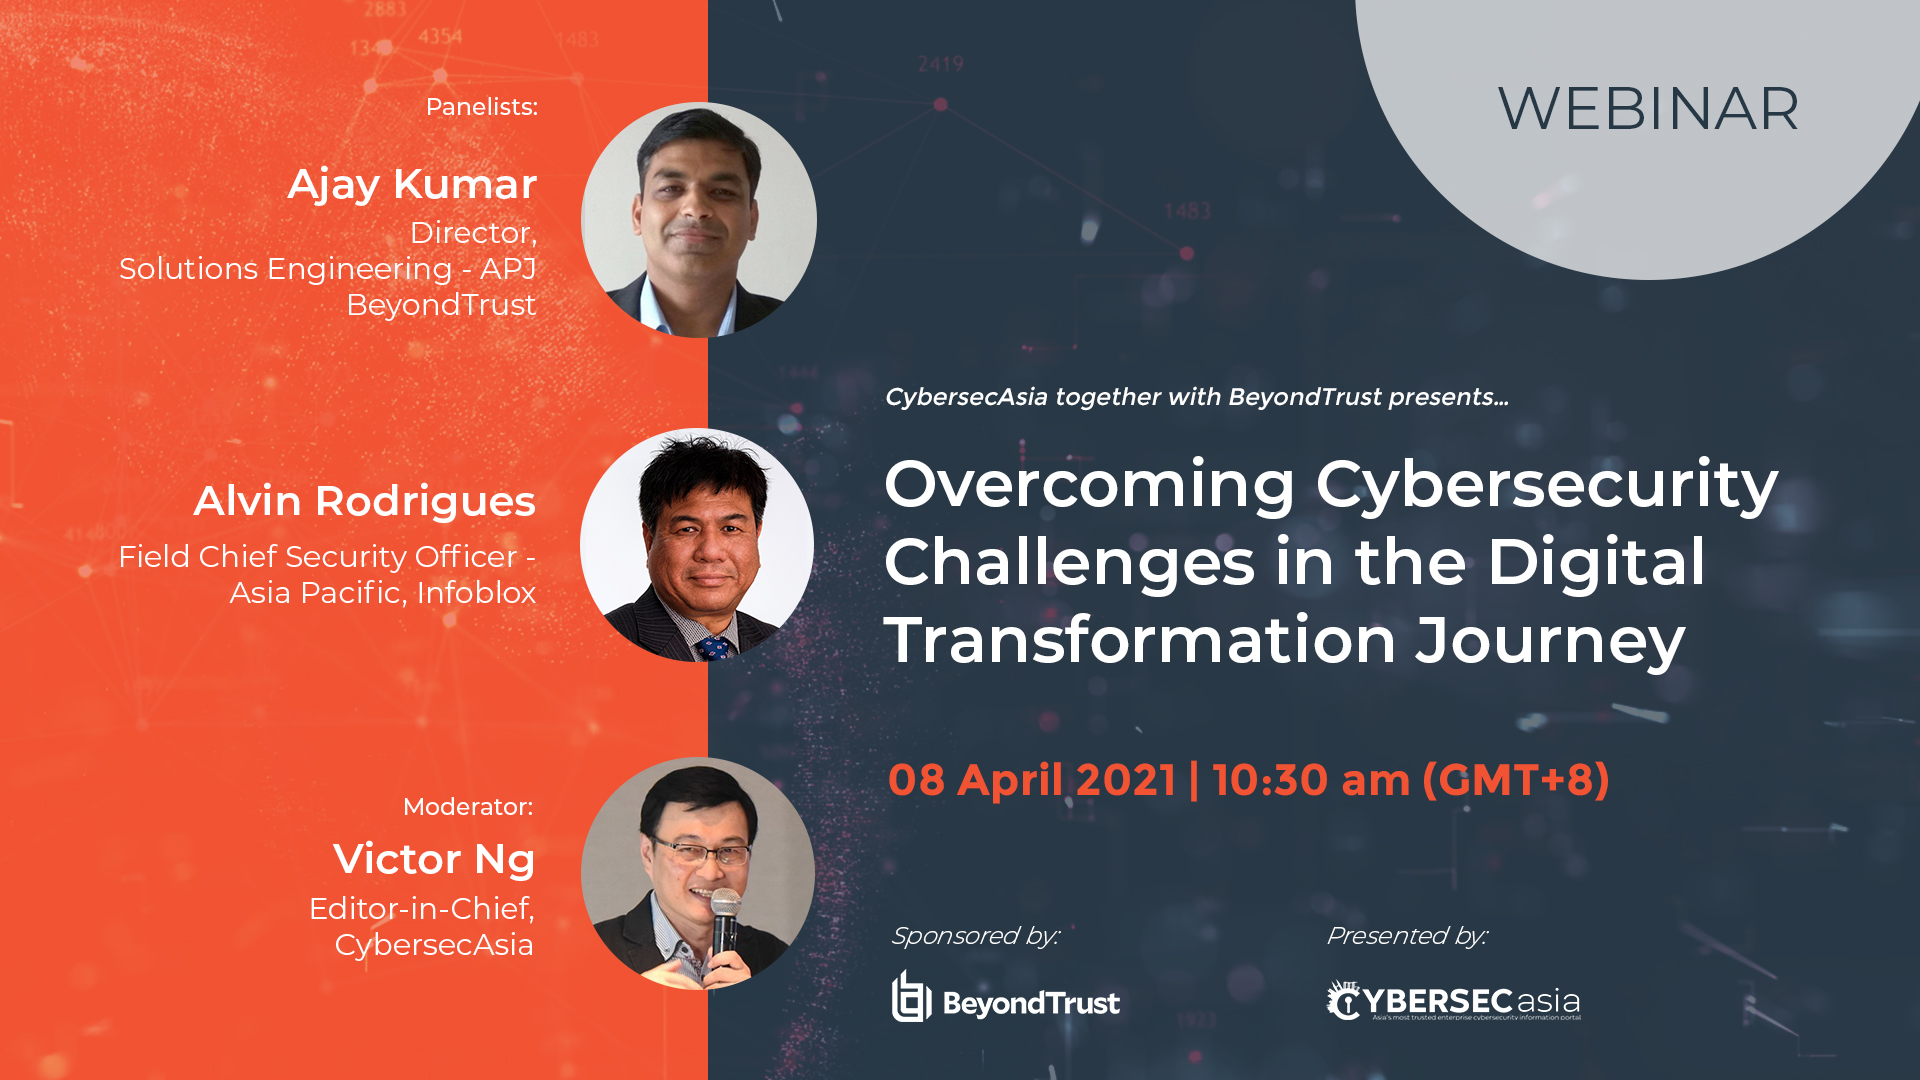 Overcoming Cybersecurity Challenges in the Digital Transformation Journey